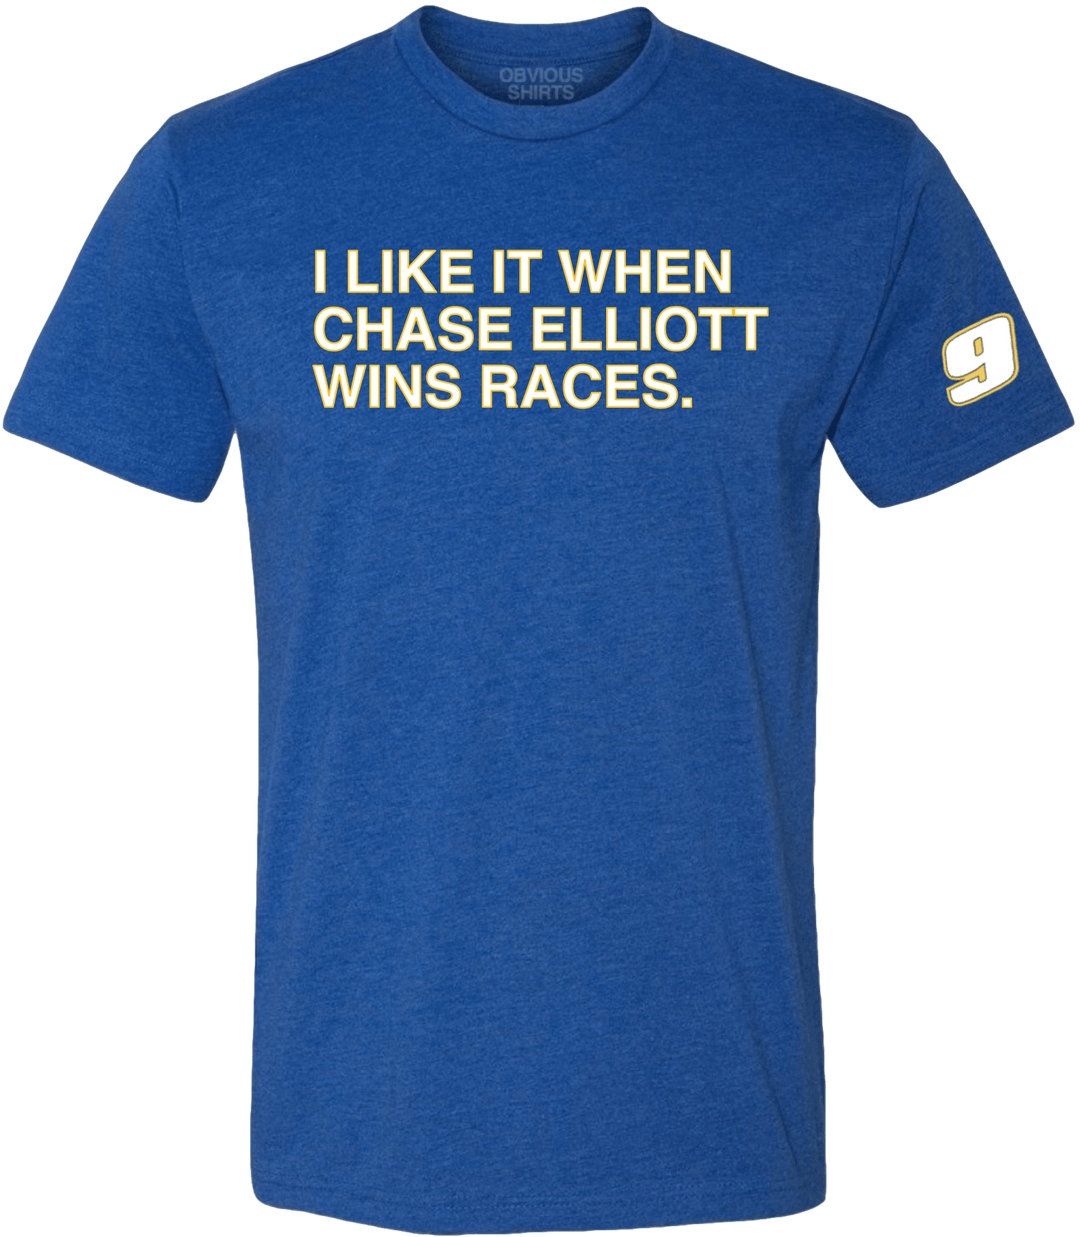 I LIKE IT WHEN CHASE ELLIOTT WINS RACES. - OBVIOUS SHIRTS